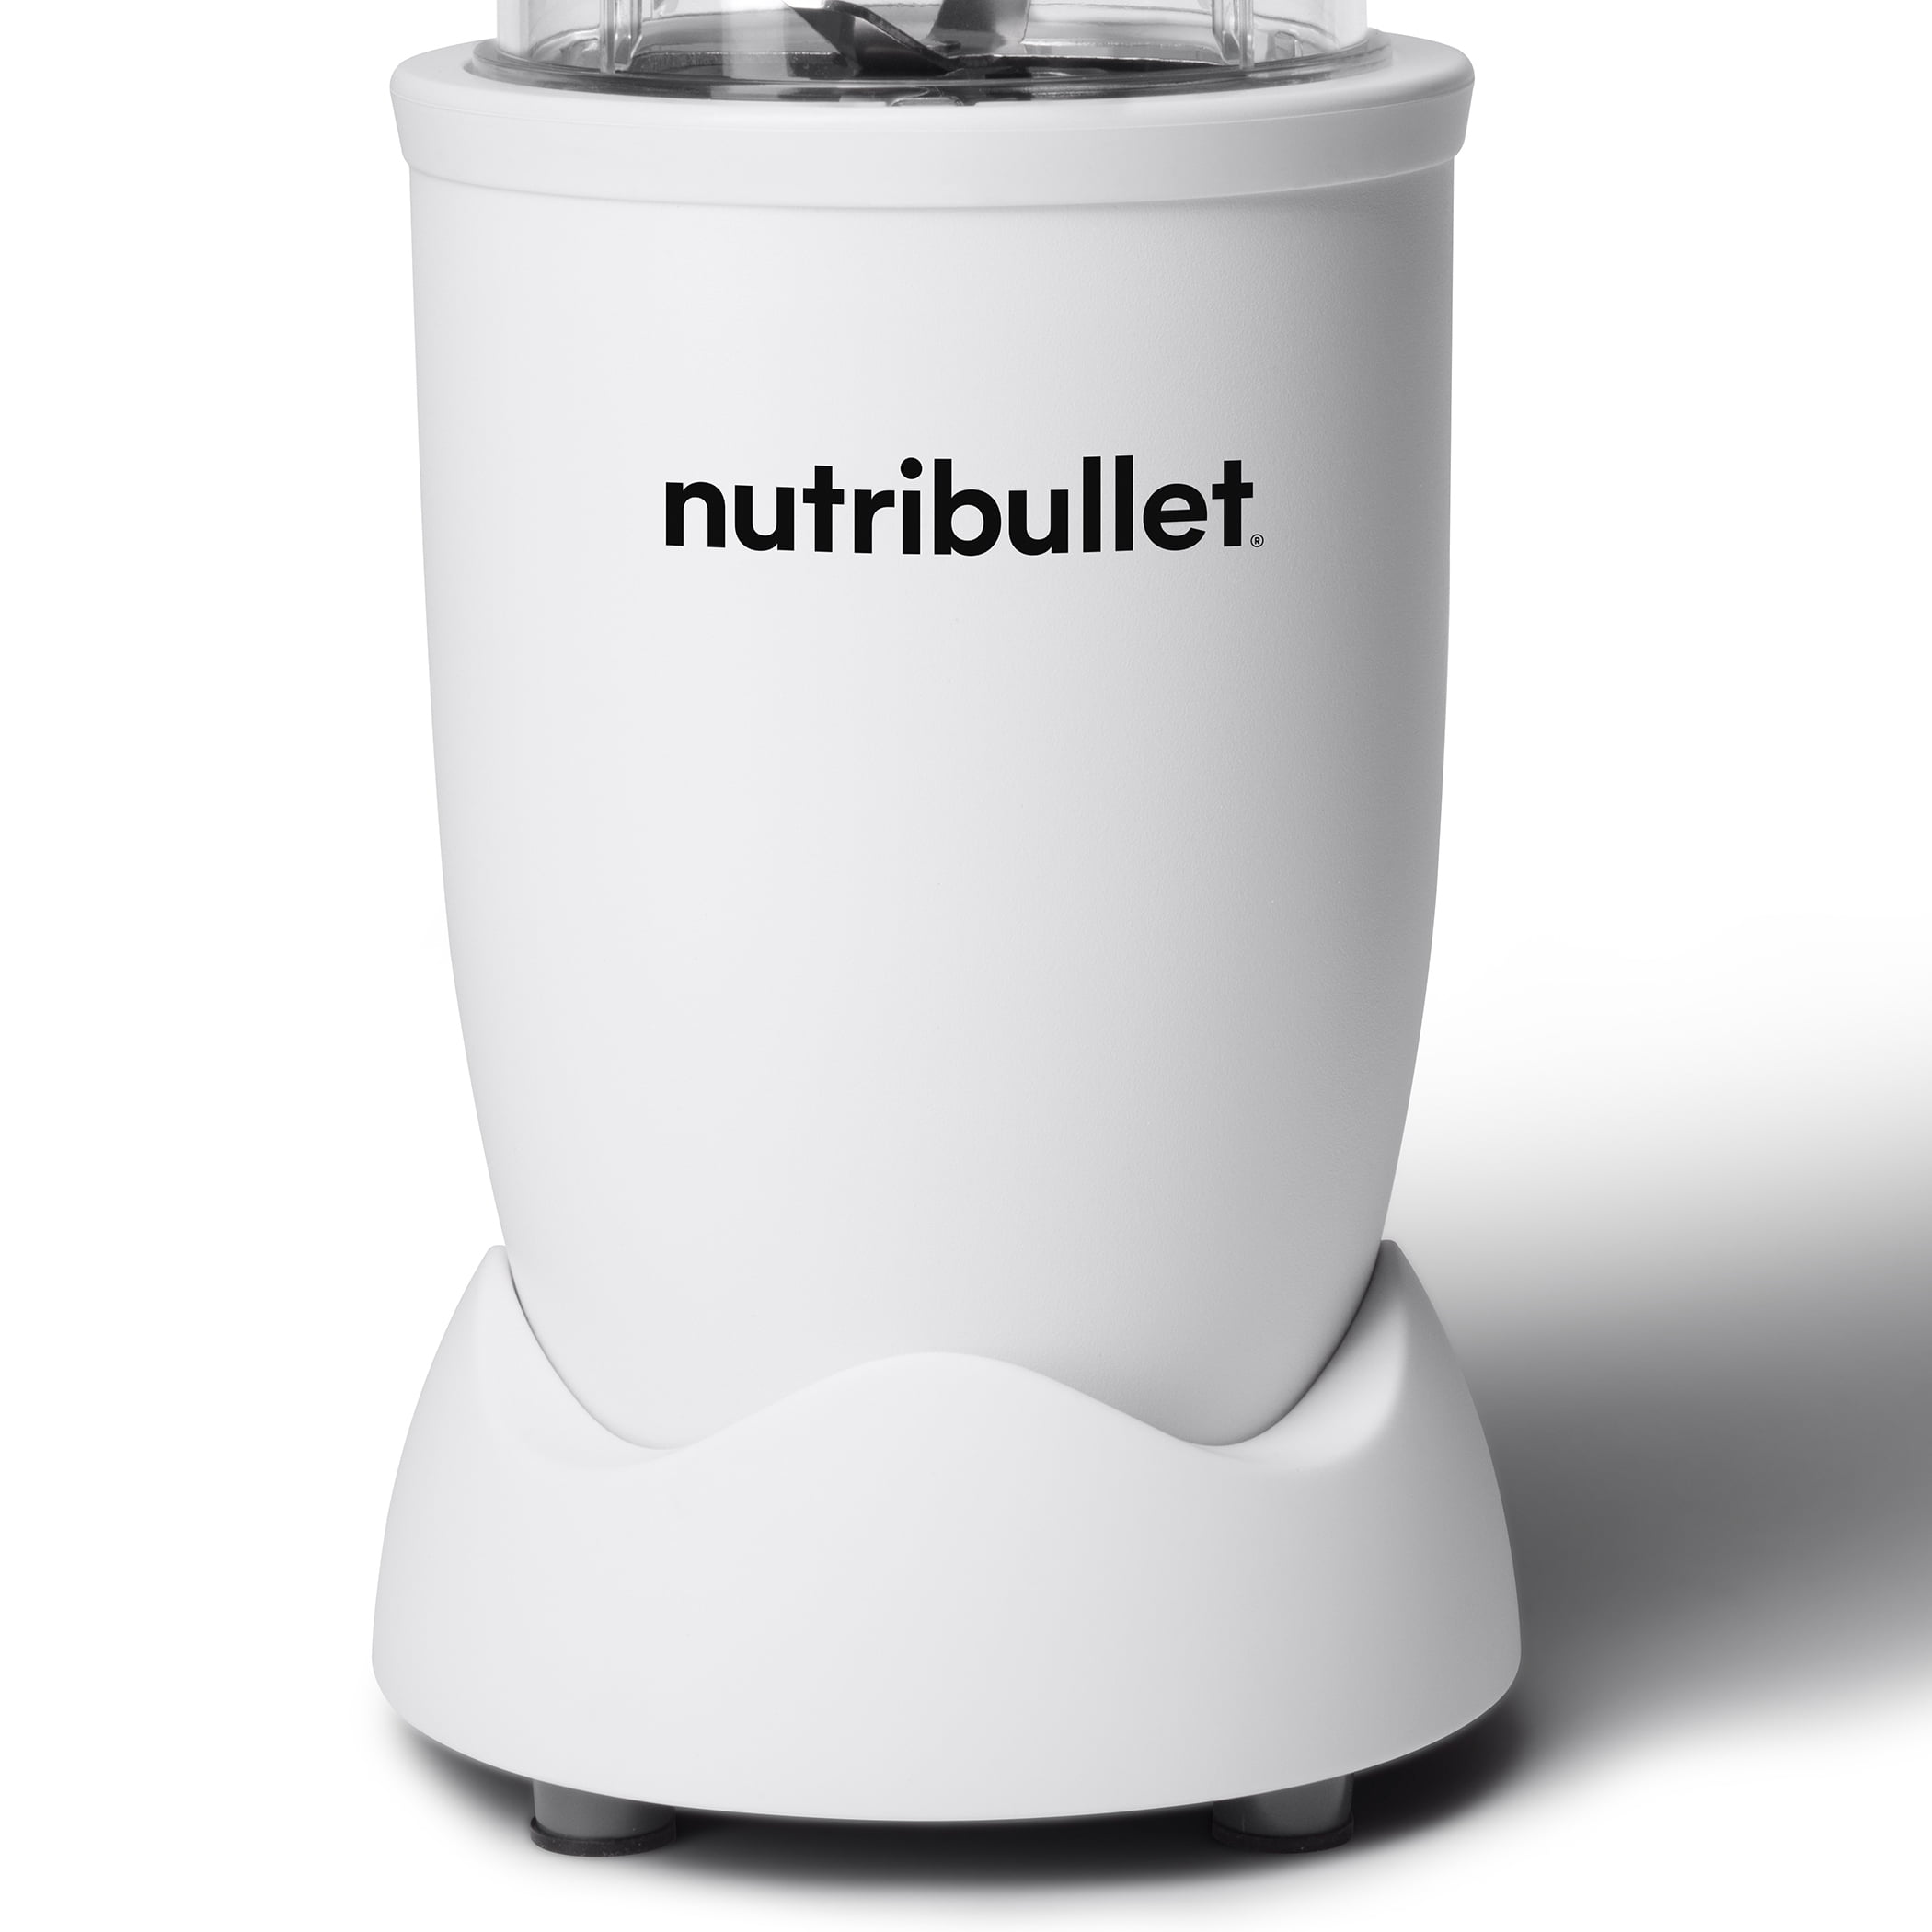 NutriBullet Pro 900 rated a 'safety hazard': Consumer Reports. Other  blenders to try